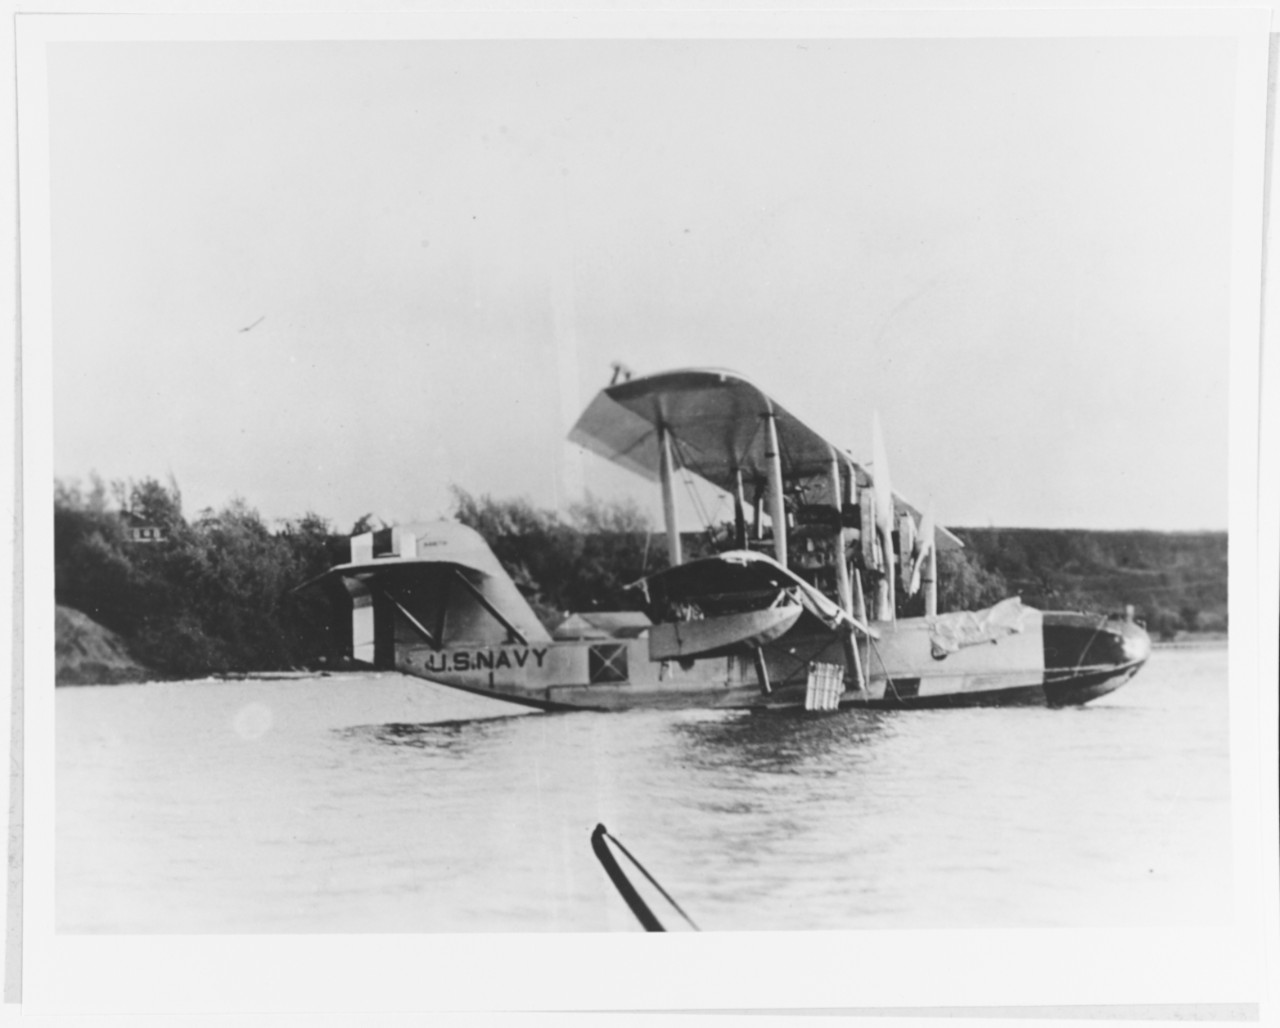 PN-9 (A-6878) Naval Aircraft Factory PN Flying Boat